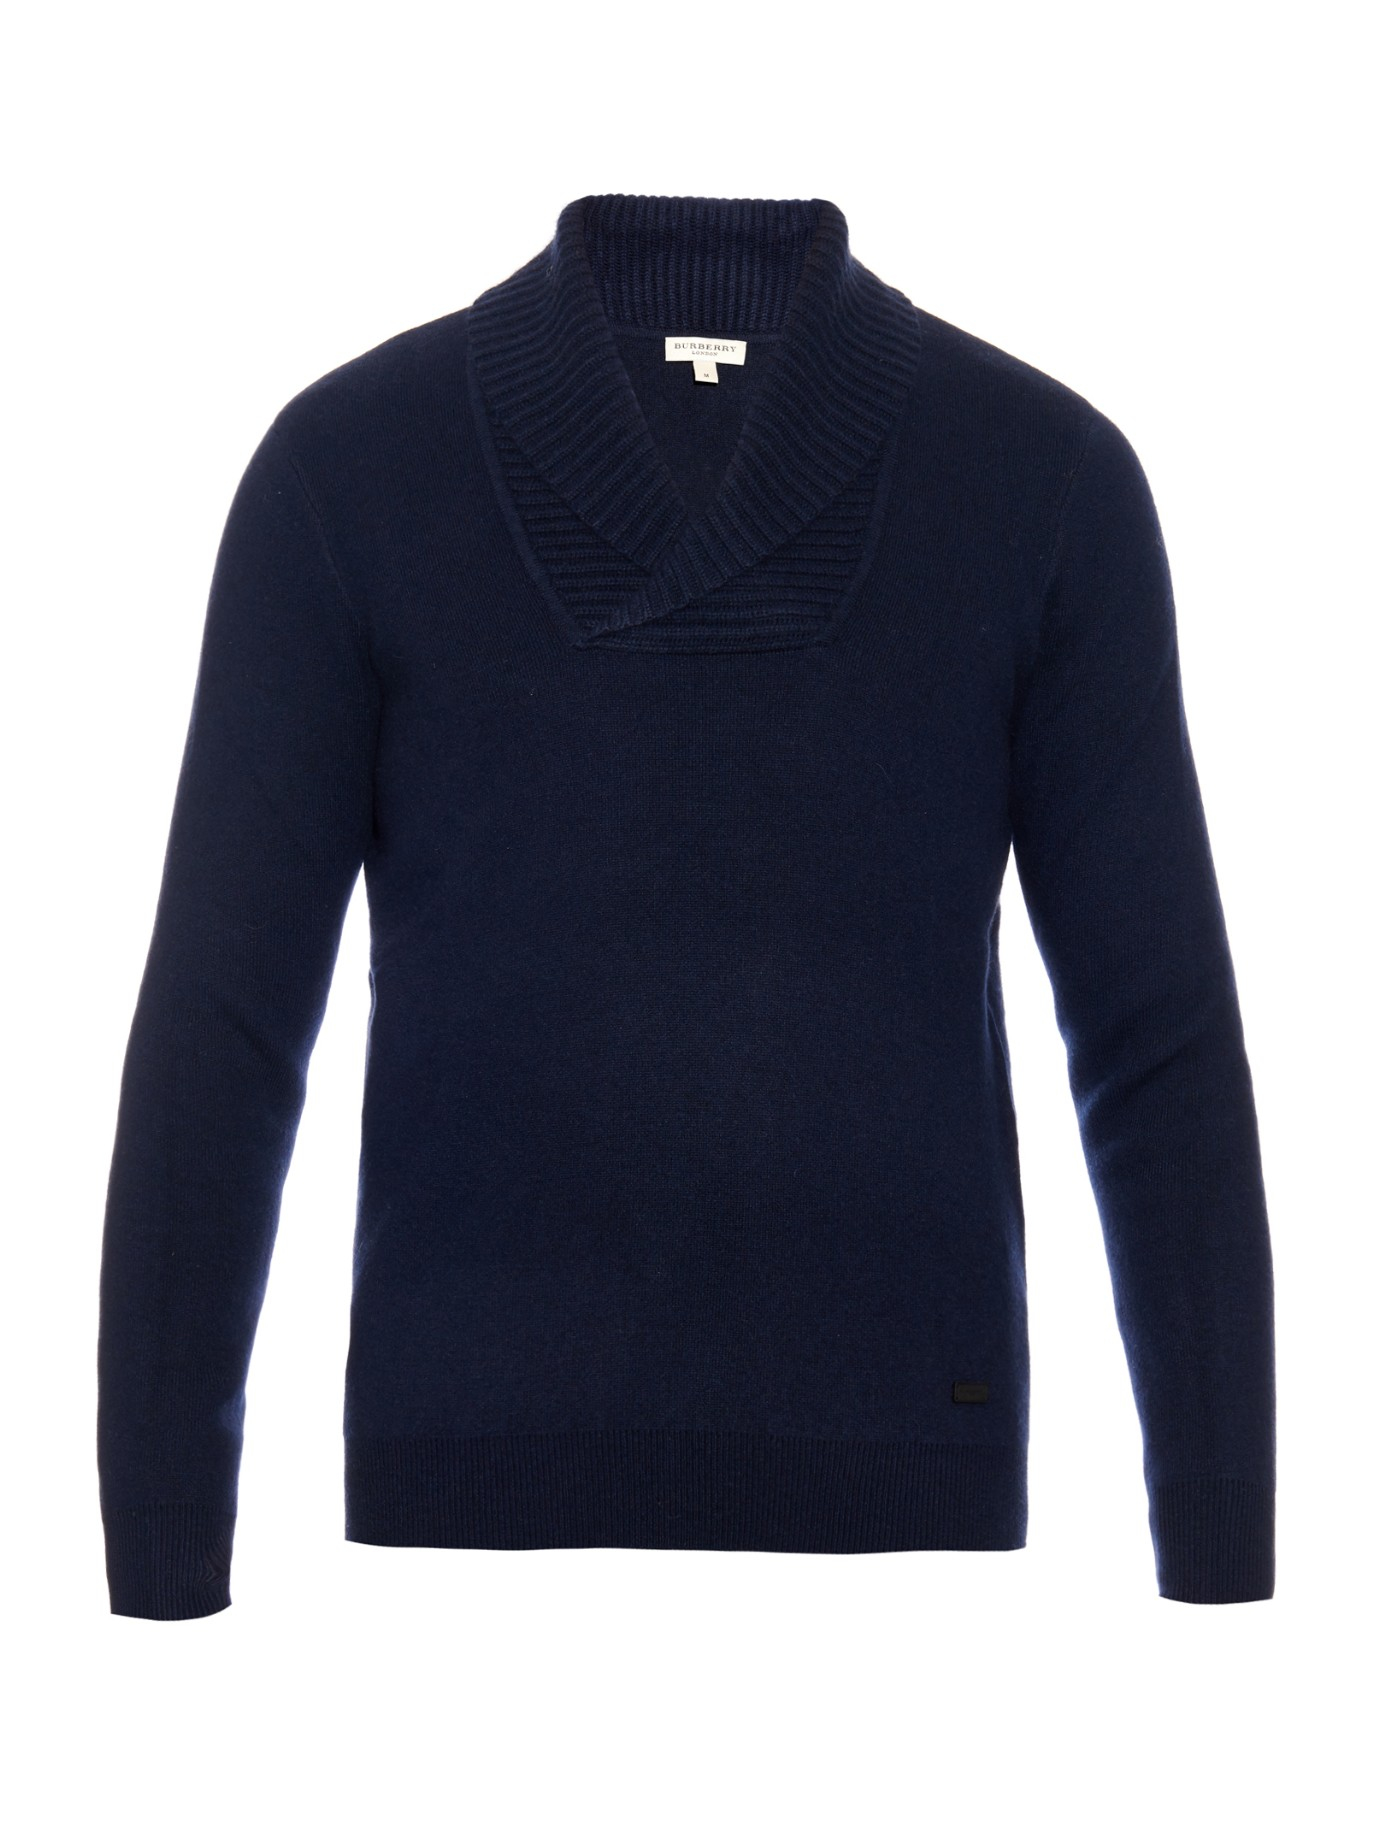 Burberry Shawl-collar Wool And Cashmere-blend Sweater in Blue for Men